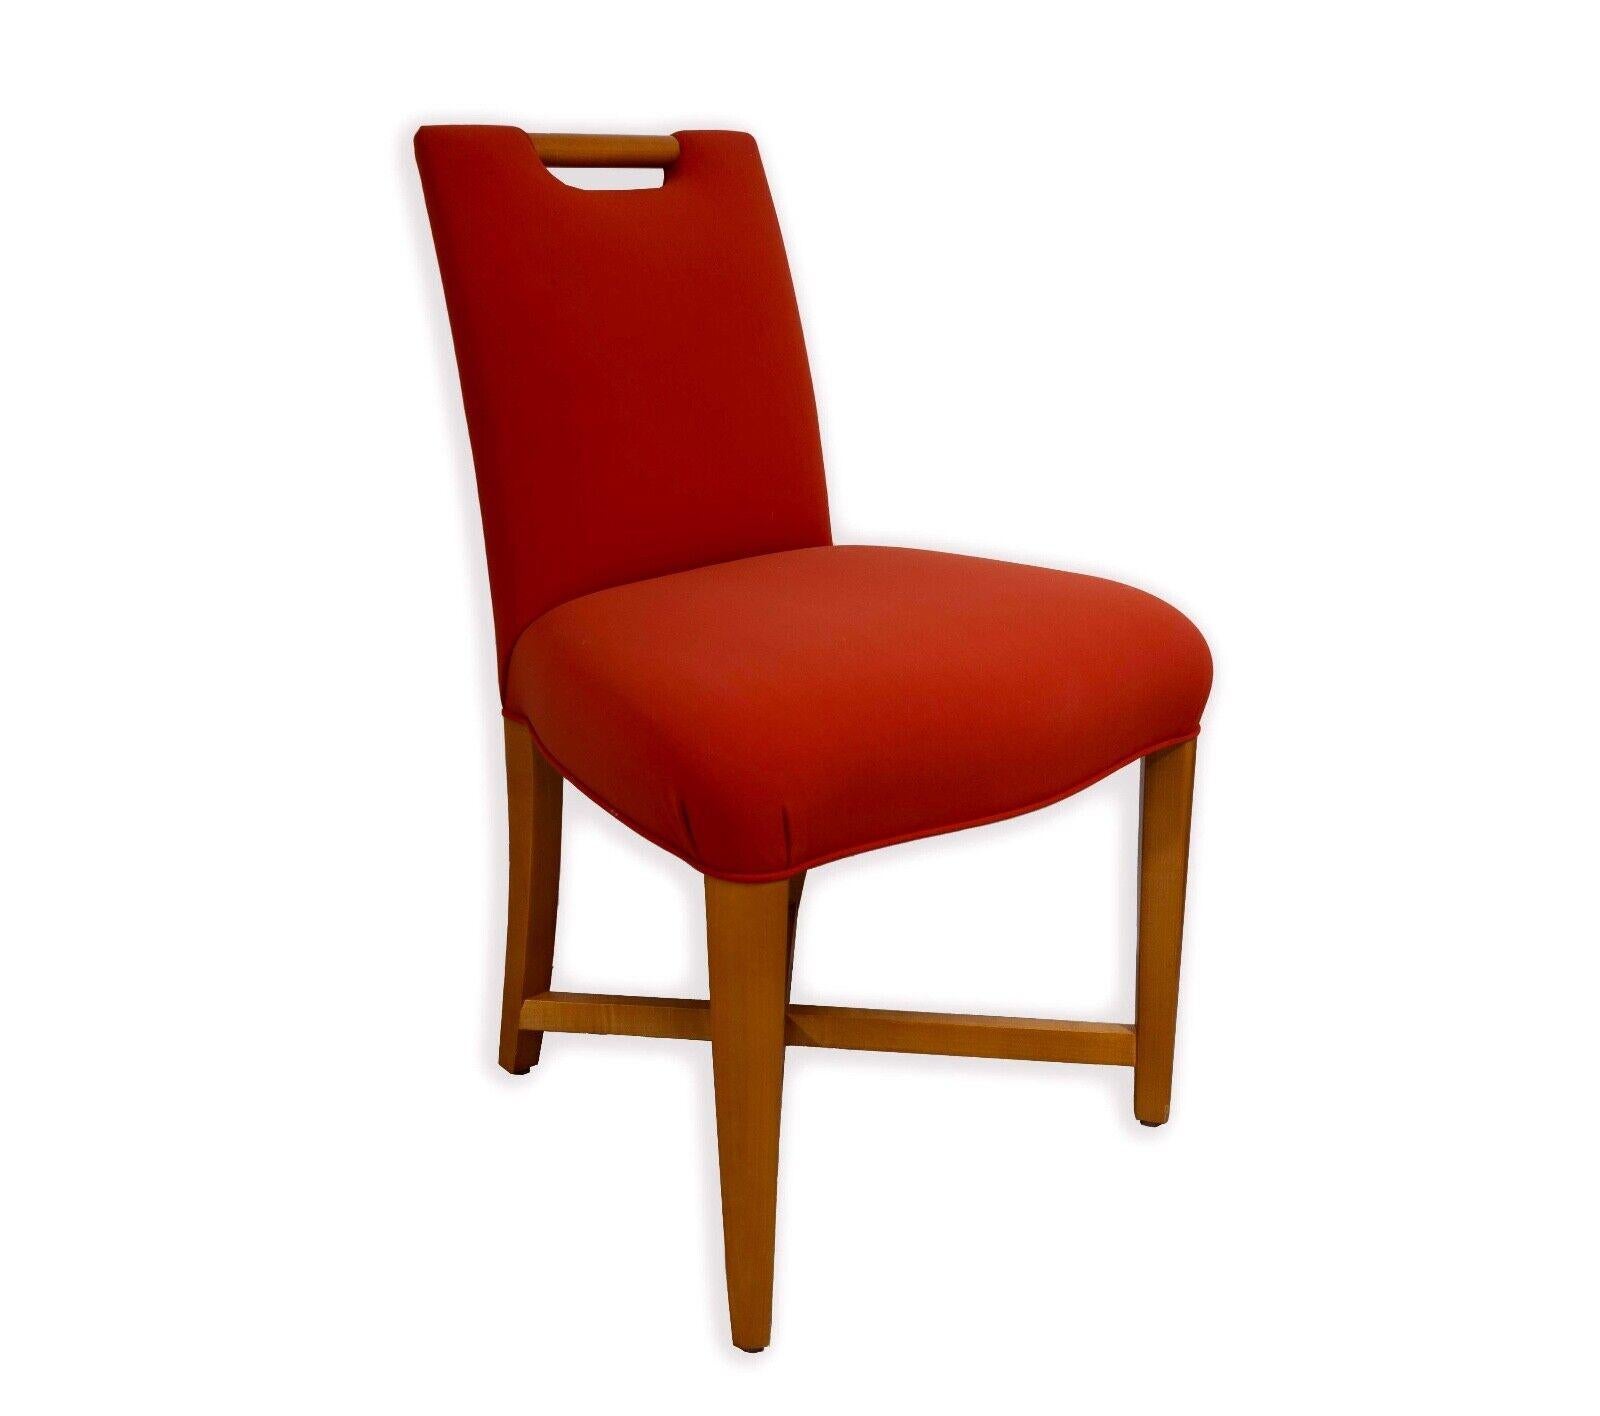 This set of four Donghia mid-century modern side chairs, a testament to timeless design and quality craftsmanship. Each chair features a vibrant orange upholstered seat and backrest, providing a bold pop of color and a touch of retro flair. The warm